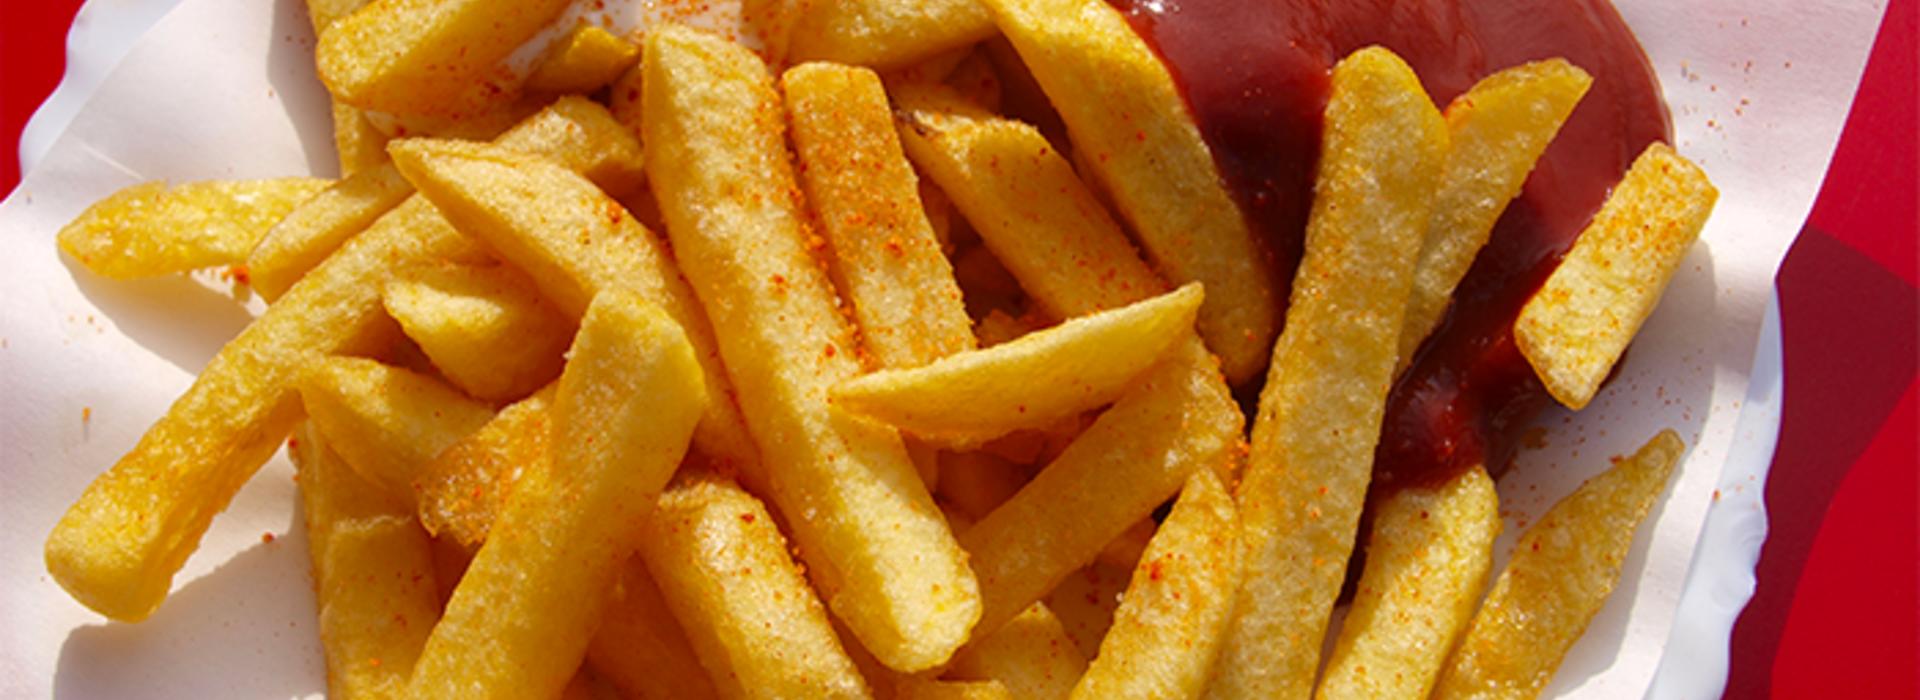 A serving of french fries and ketchup.